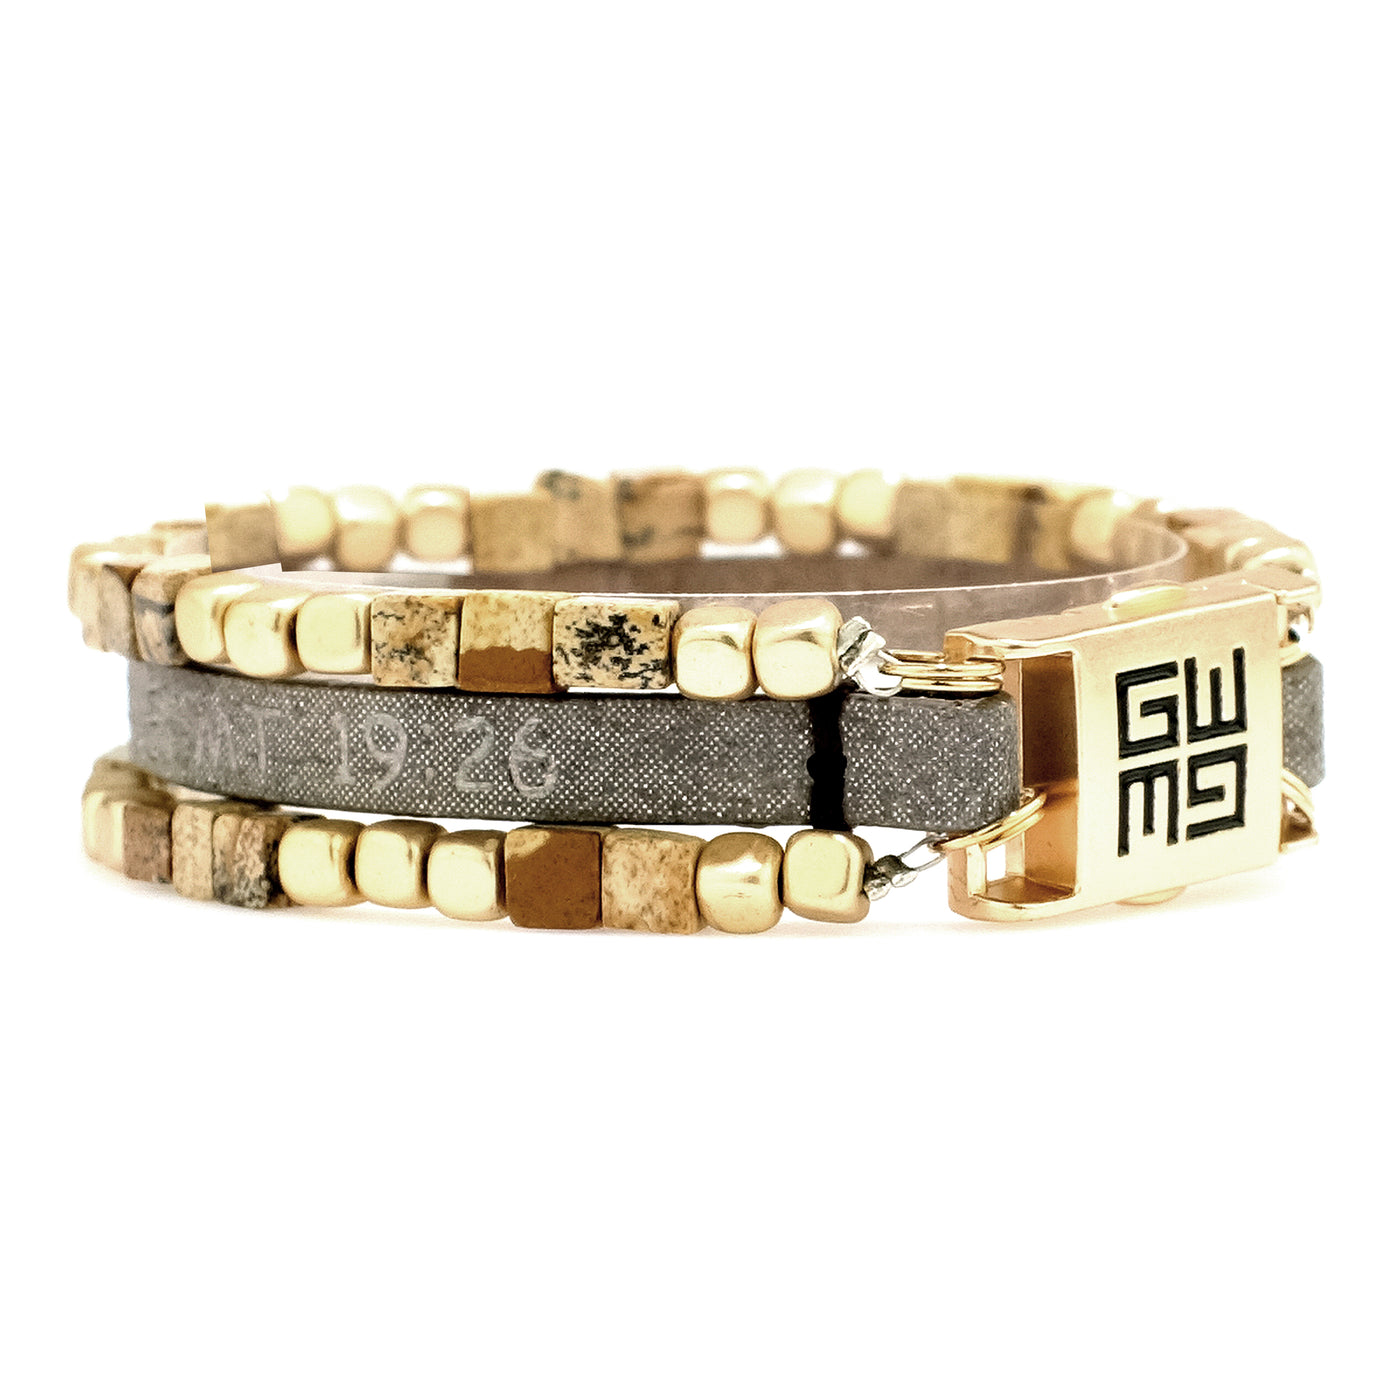 Fossil Bracelet-Good Work(s) Make A Difference® | Christian and Inspirational Jewelry Company in Vernon, California